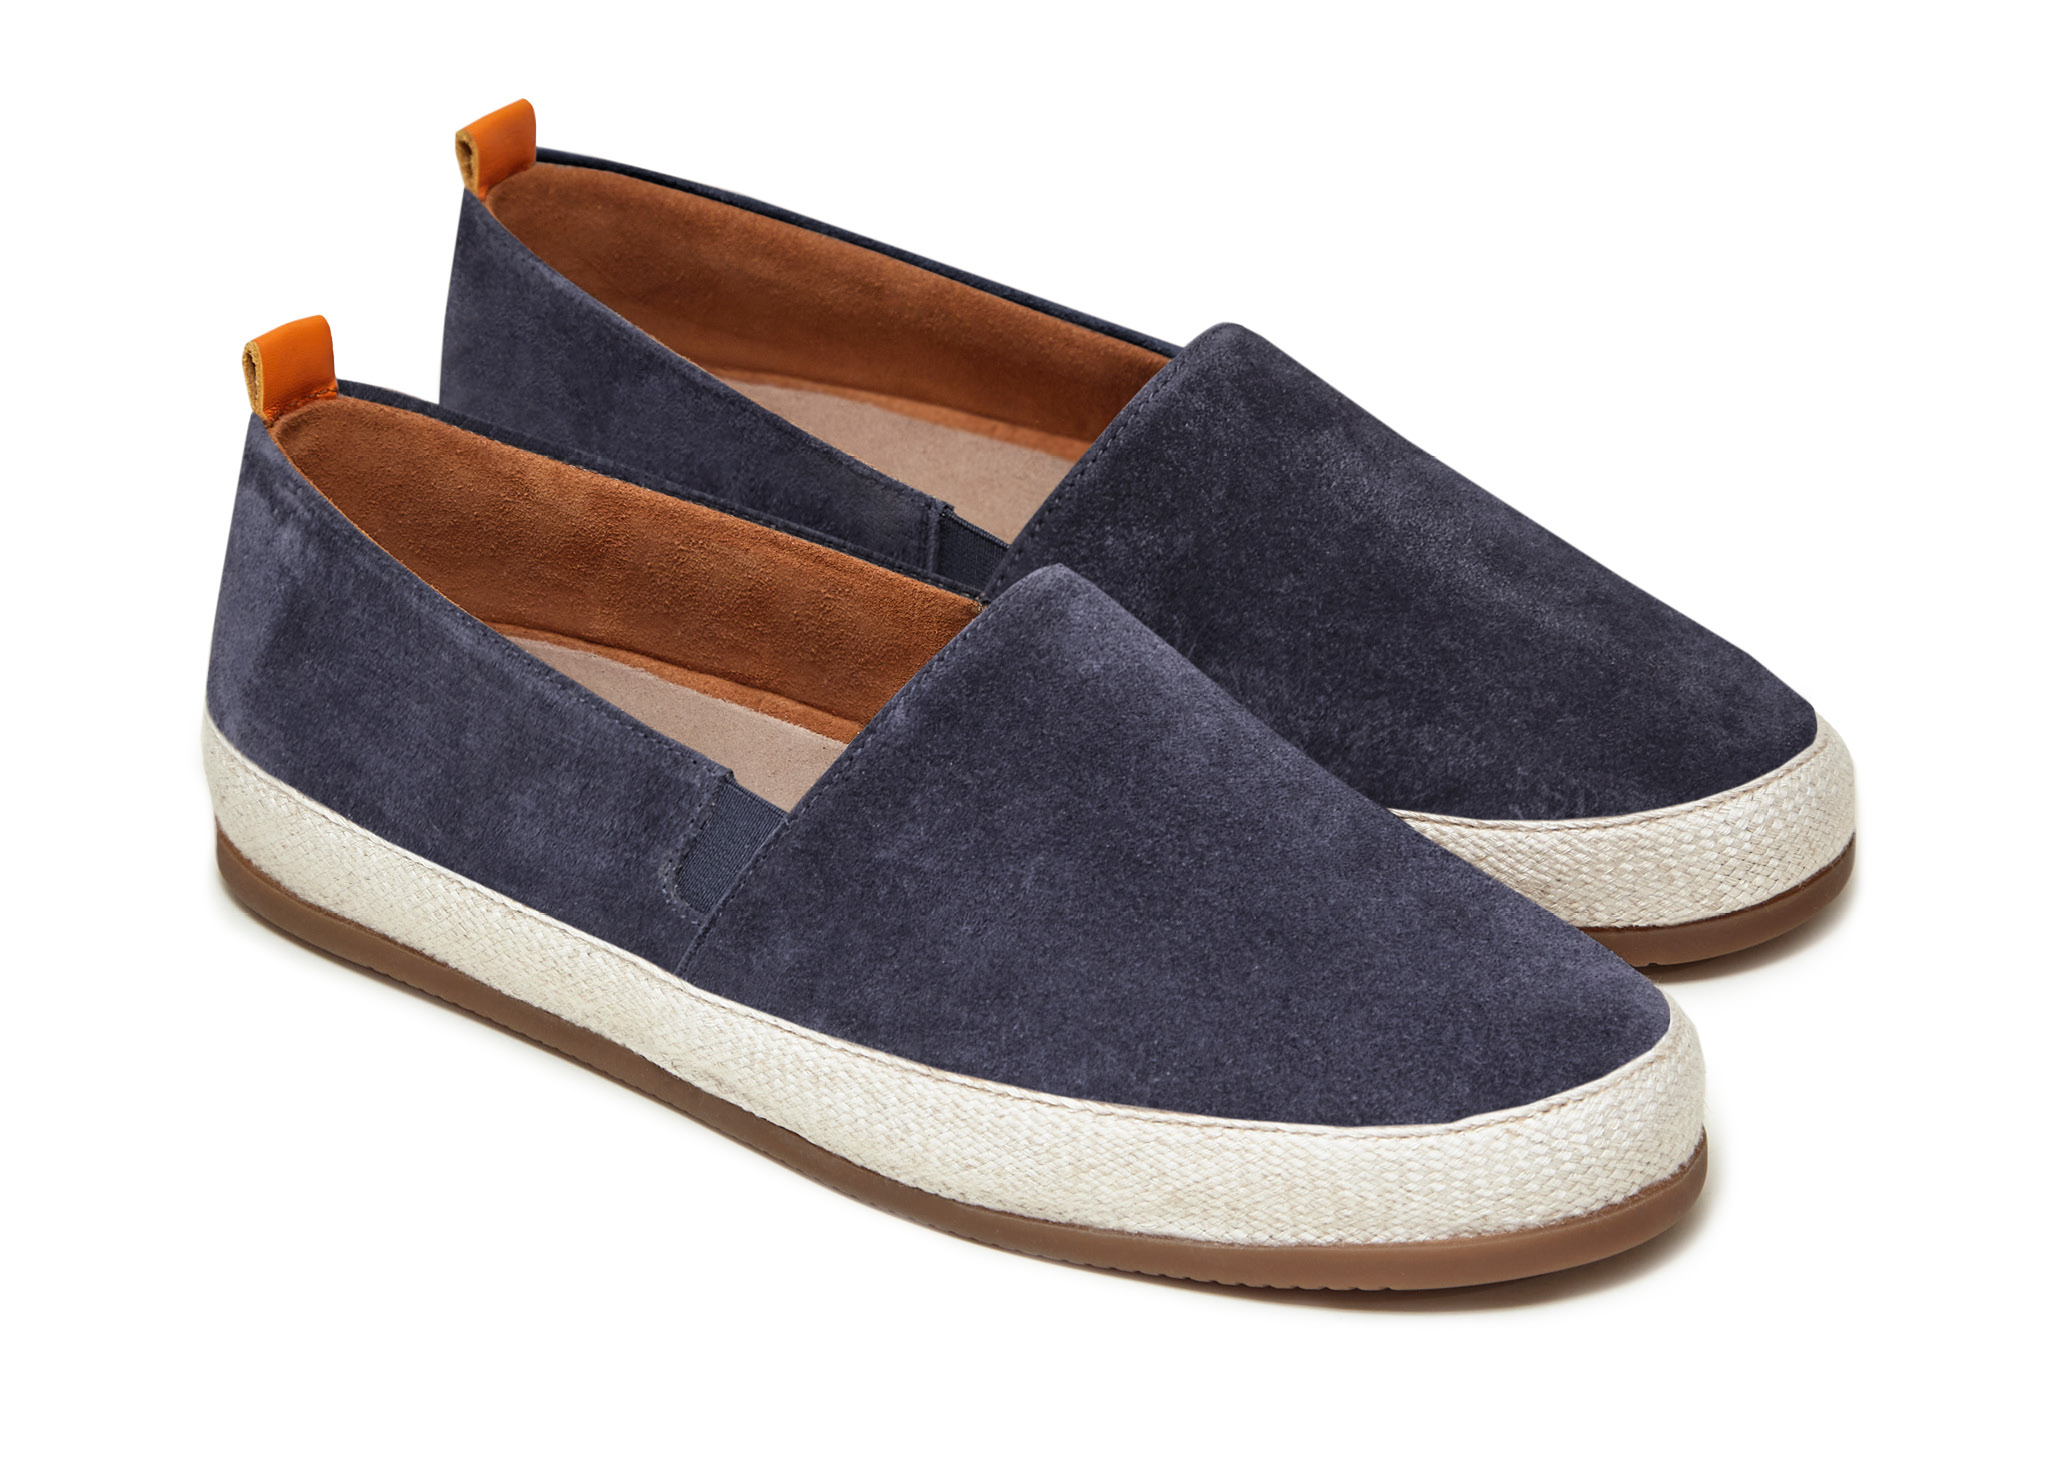 Mulo Suede Espadrilles in Blue for Men Mens Shoes Slip-on shoes Espadrille shoes and sandals 